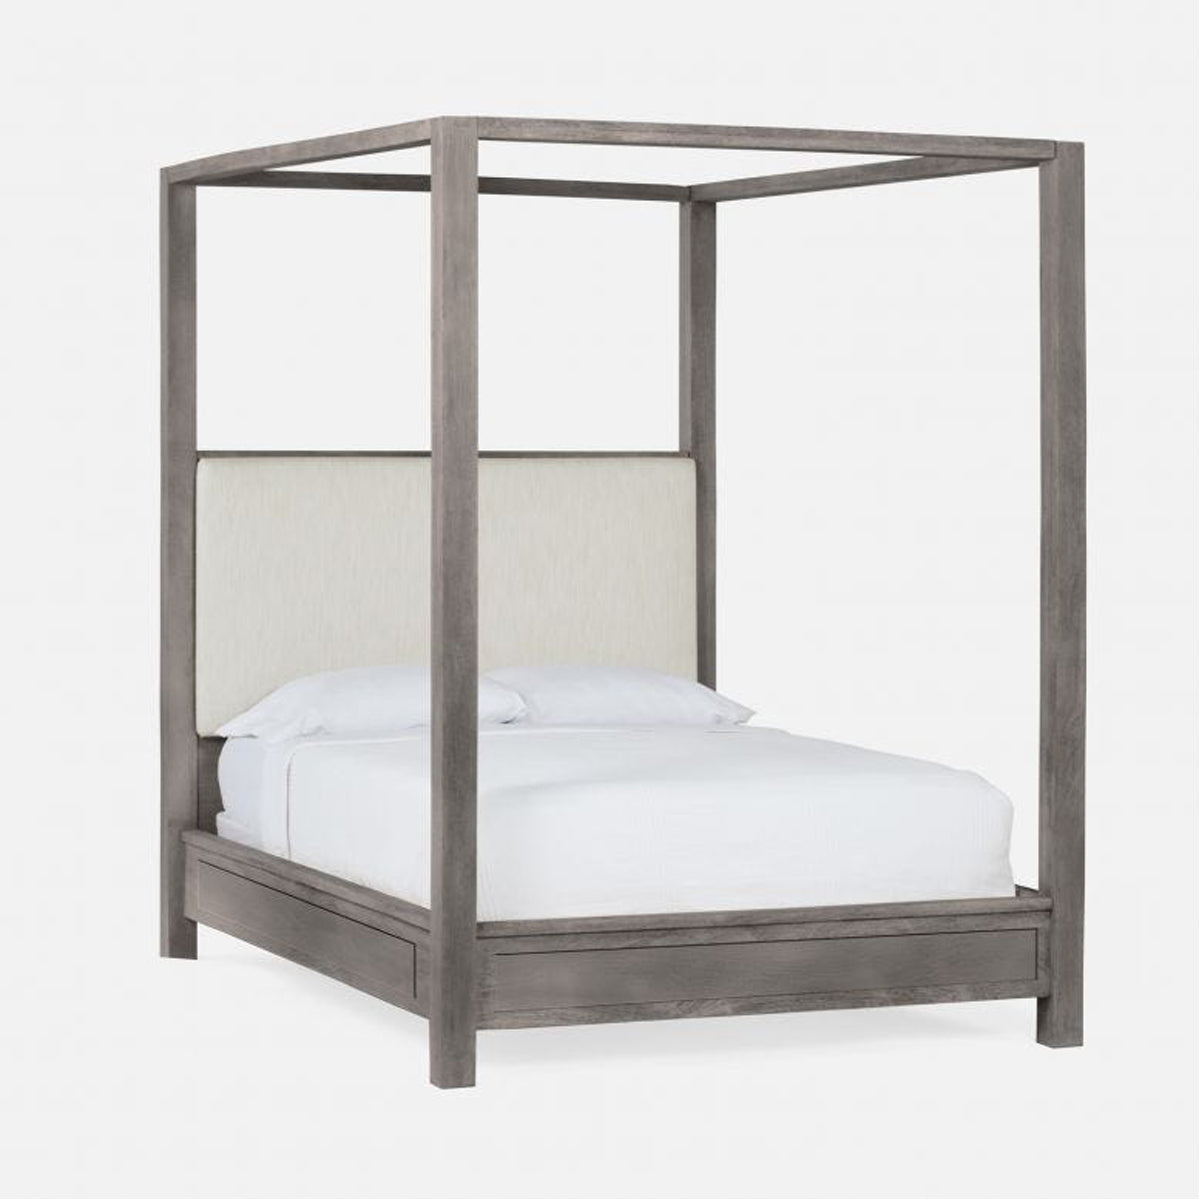 Made Goods Allesandro Boxy Canopy Bed in Brenta Cotton/Jute